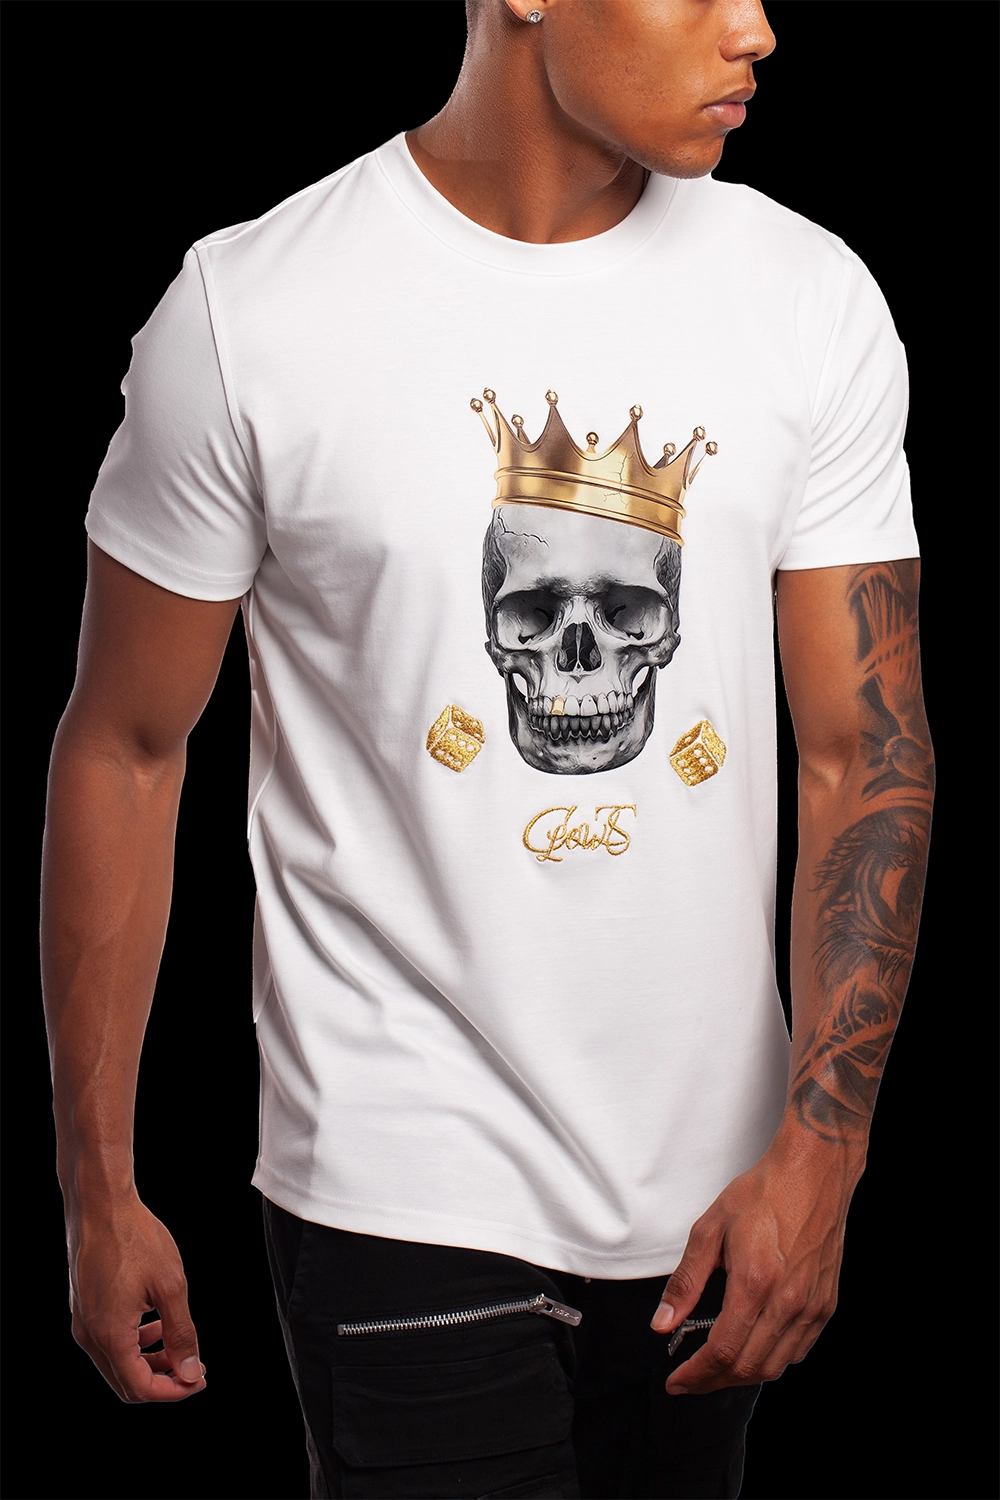 White Art T Shirt embroidered with the worlds finest Piana Clerico 24-carat gold thread- made exclusively in Italy designed in Ireland